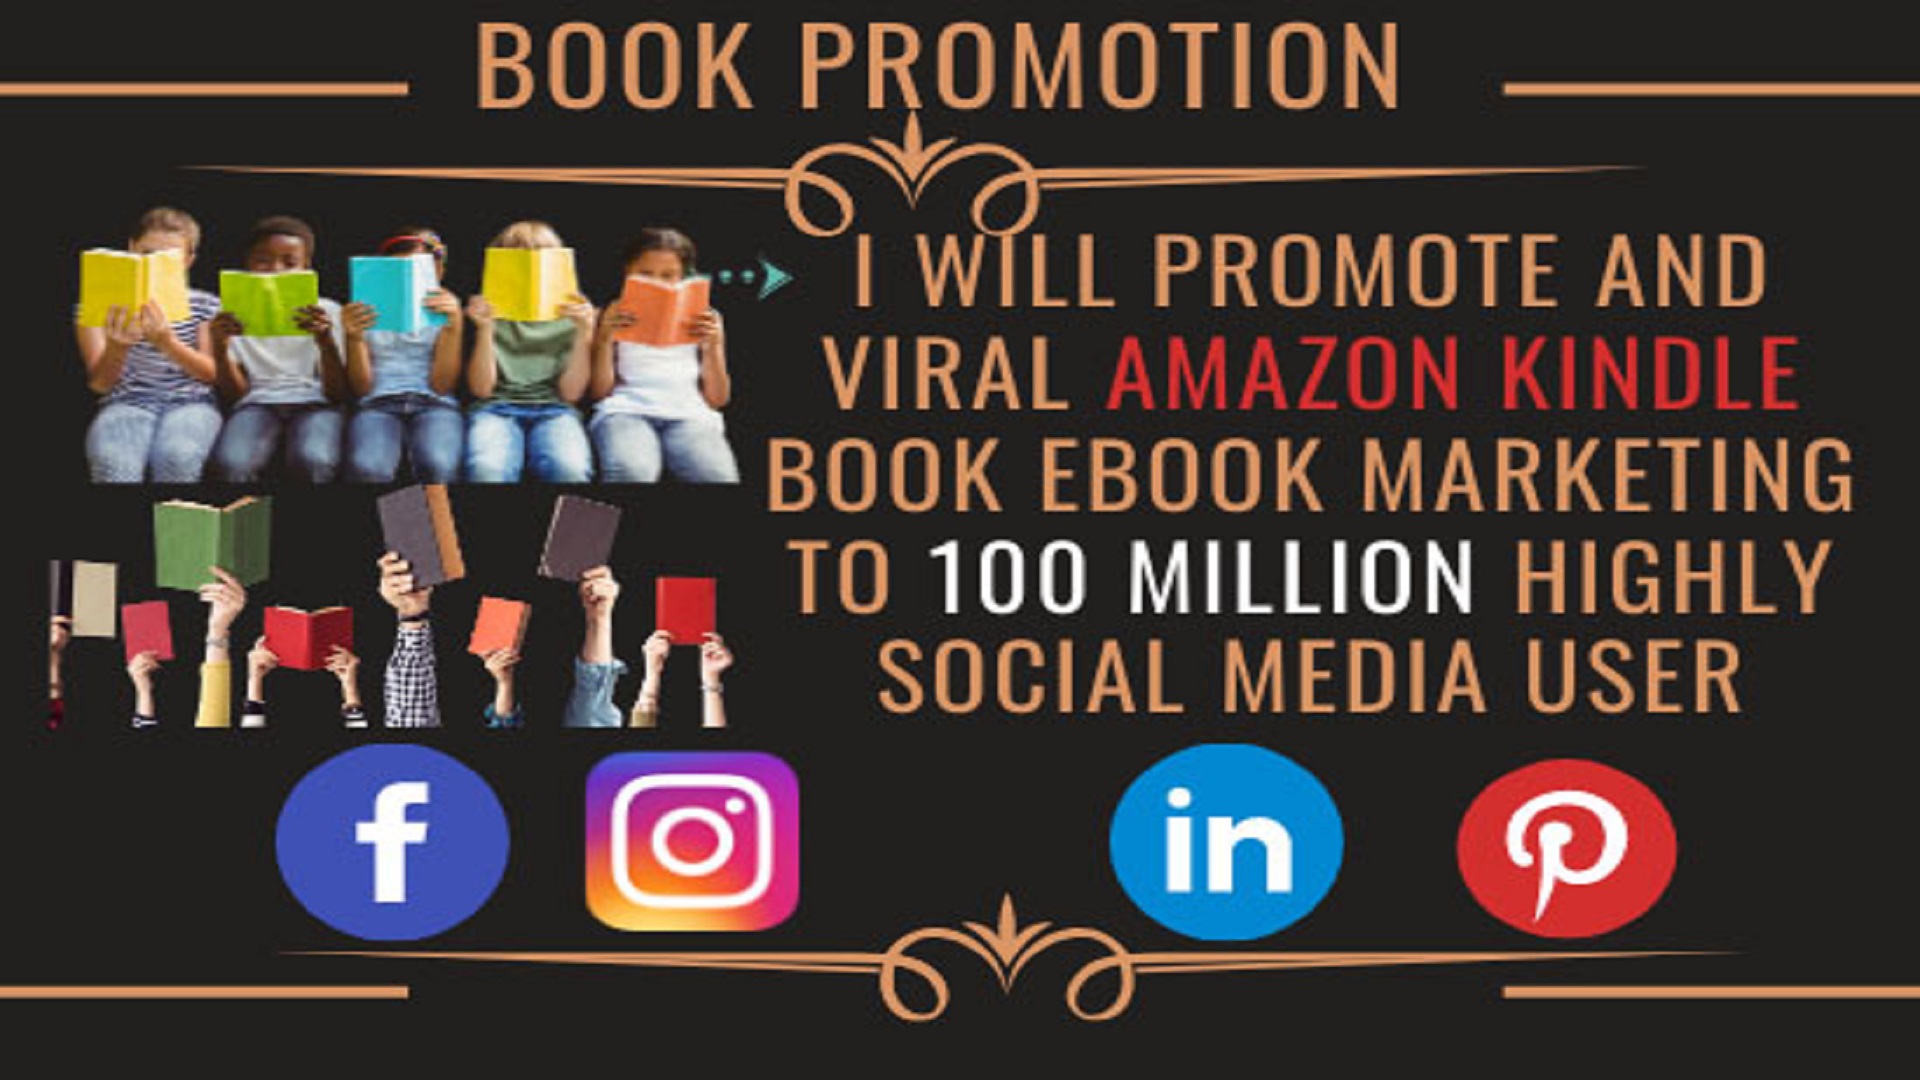 I Will Promote And Viral Amazon Kindle Book Ebook Marketing for $20